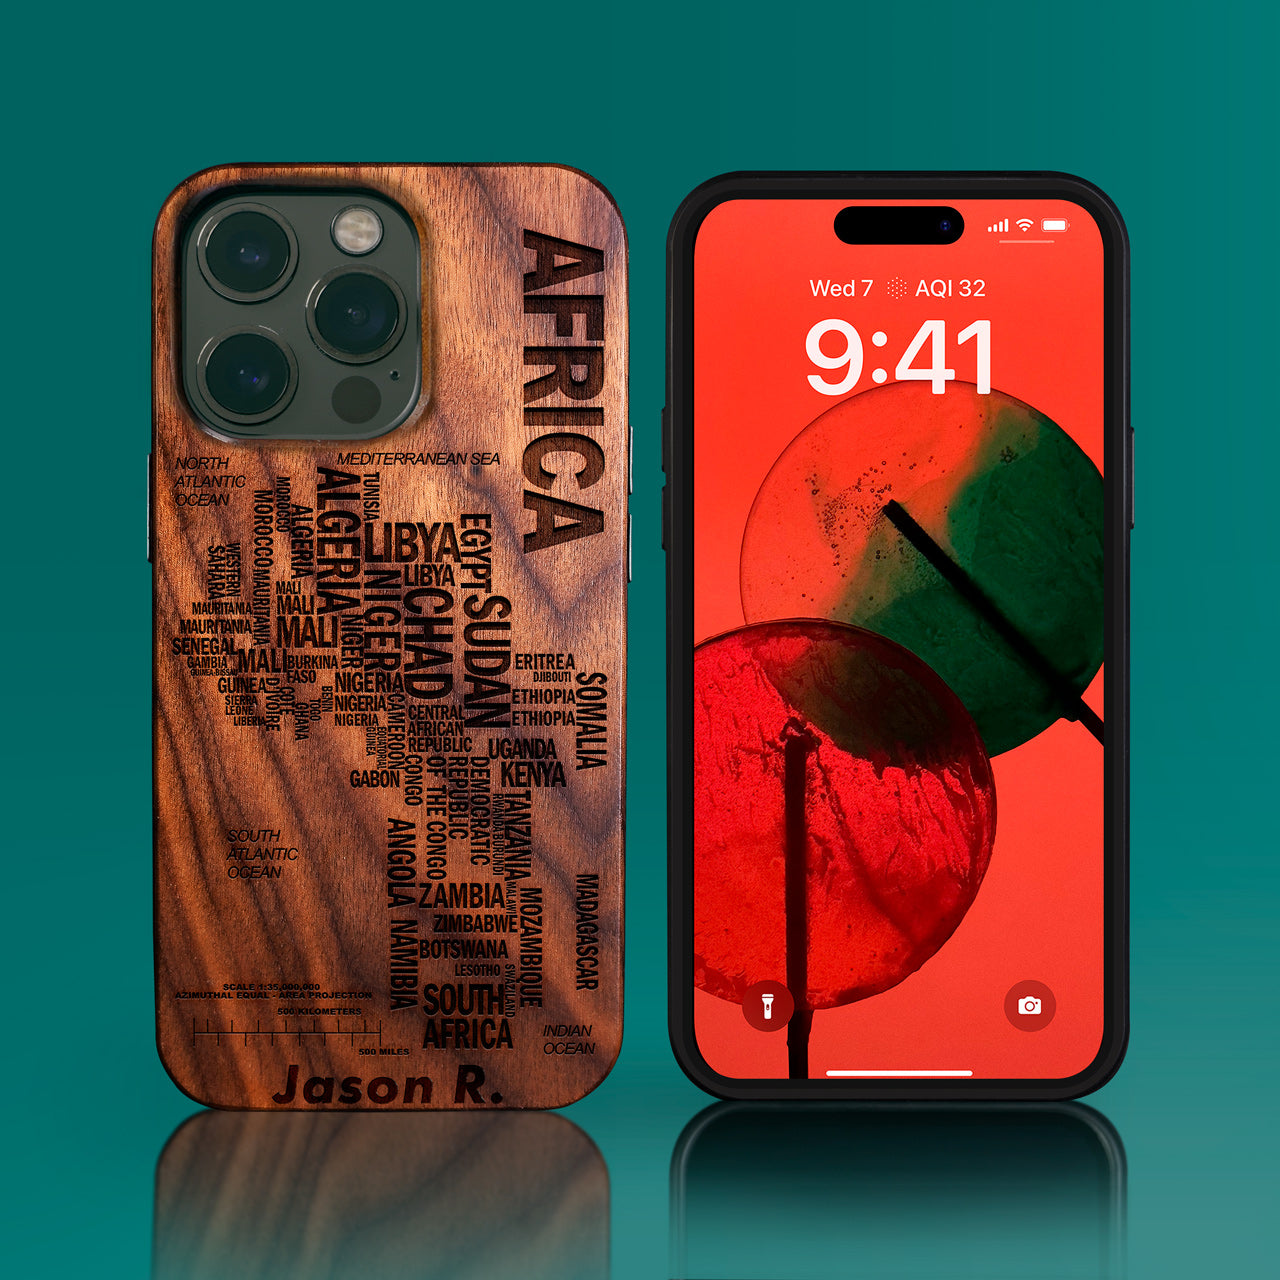 Africa Typography Map Wood iPhone 14 Pro Max Case - iPhone 13 Pro Max Case - HBCU Gear College Graduation Gifts For Black Men And Women iPhone 12, 12 Pro Max, iPhone 11 Pro, 11 Pro Max, iPhone X/XS Max, iPhone XR Case Black Owned Gifts 2022 Christmas Gifts - African American Black Owned Businesses iPhone 14 Pro Max Cover In Los Angeles 2022 Custom Gifts For Personalized Black Men 